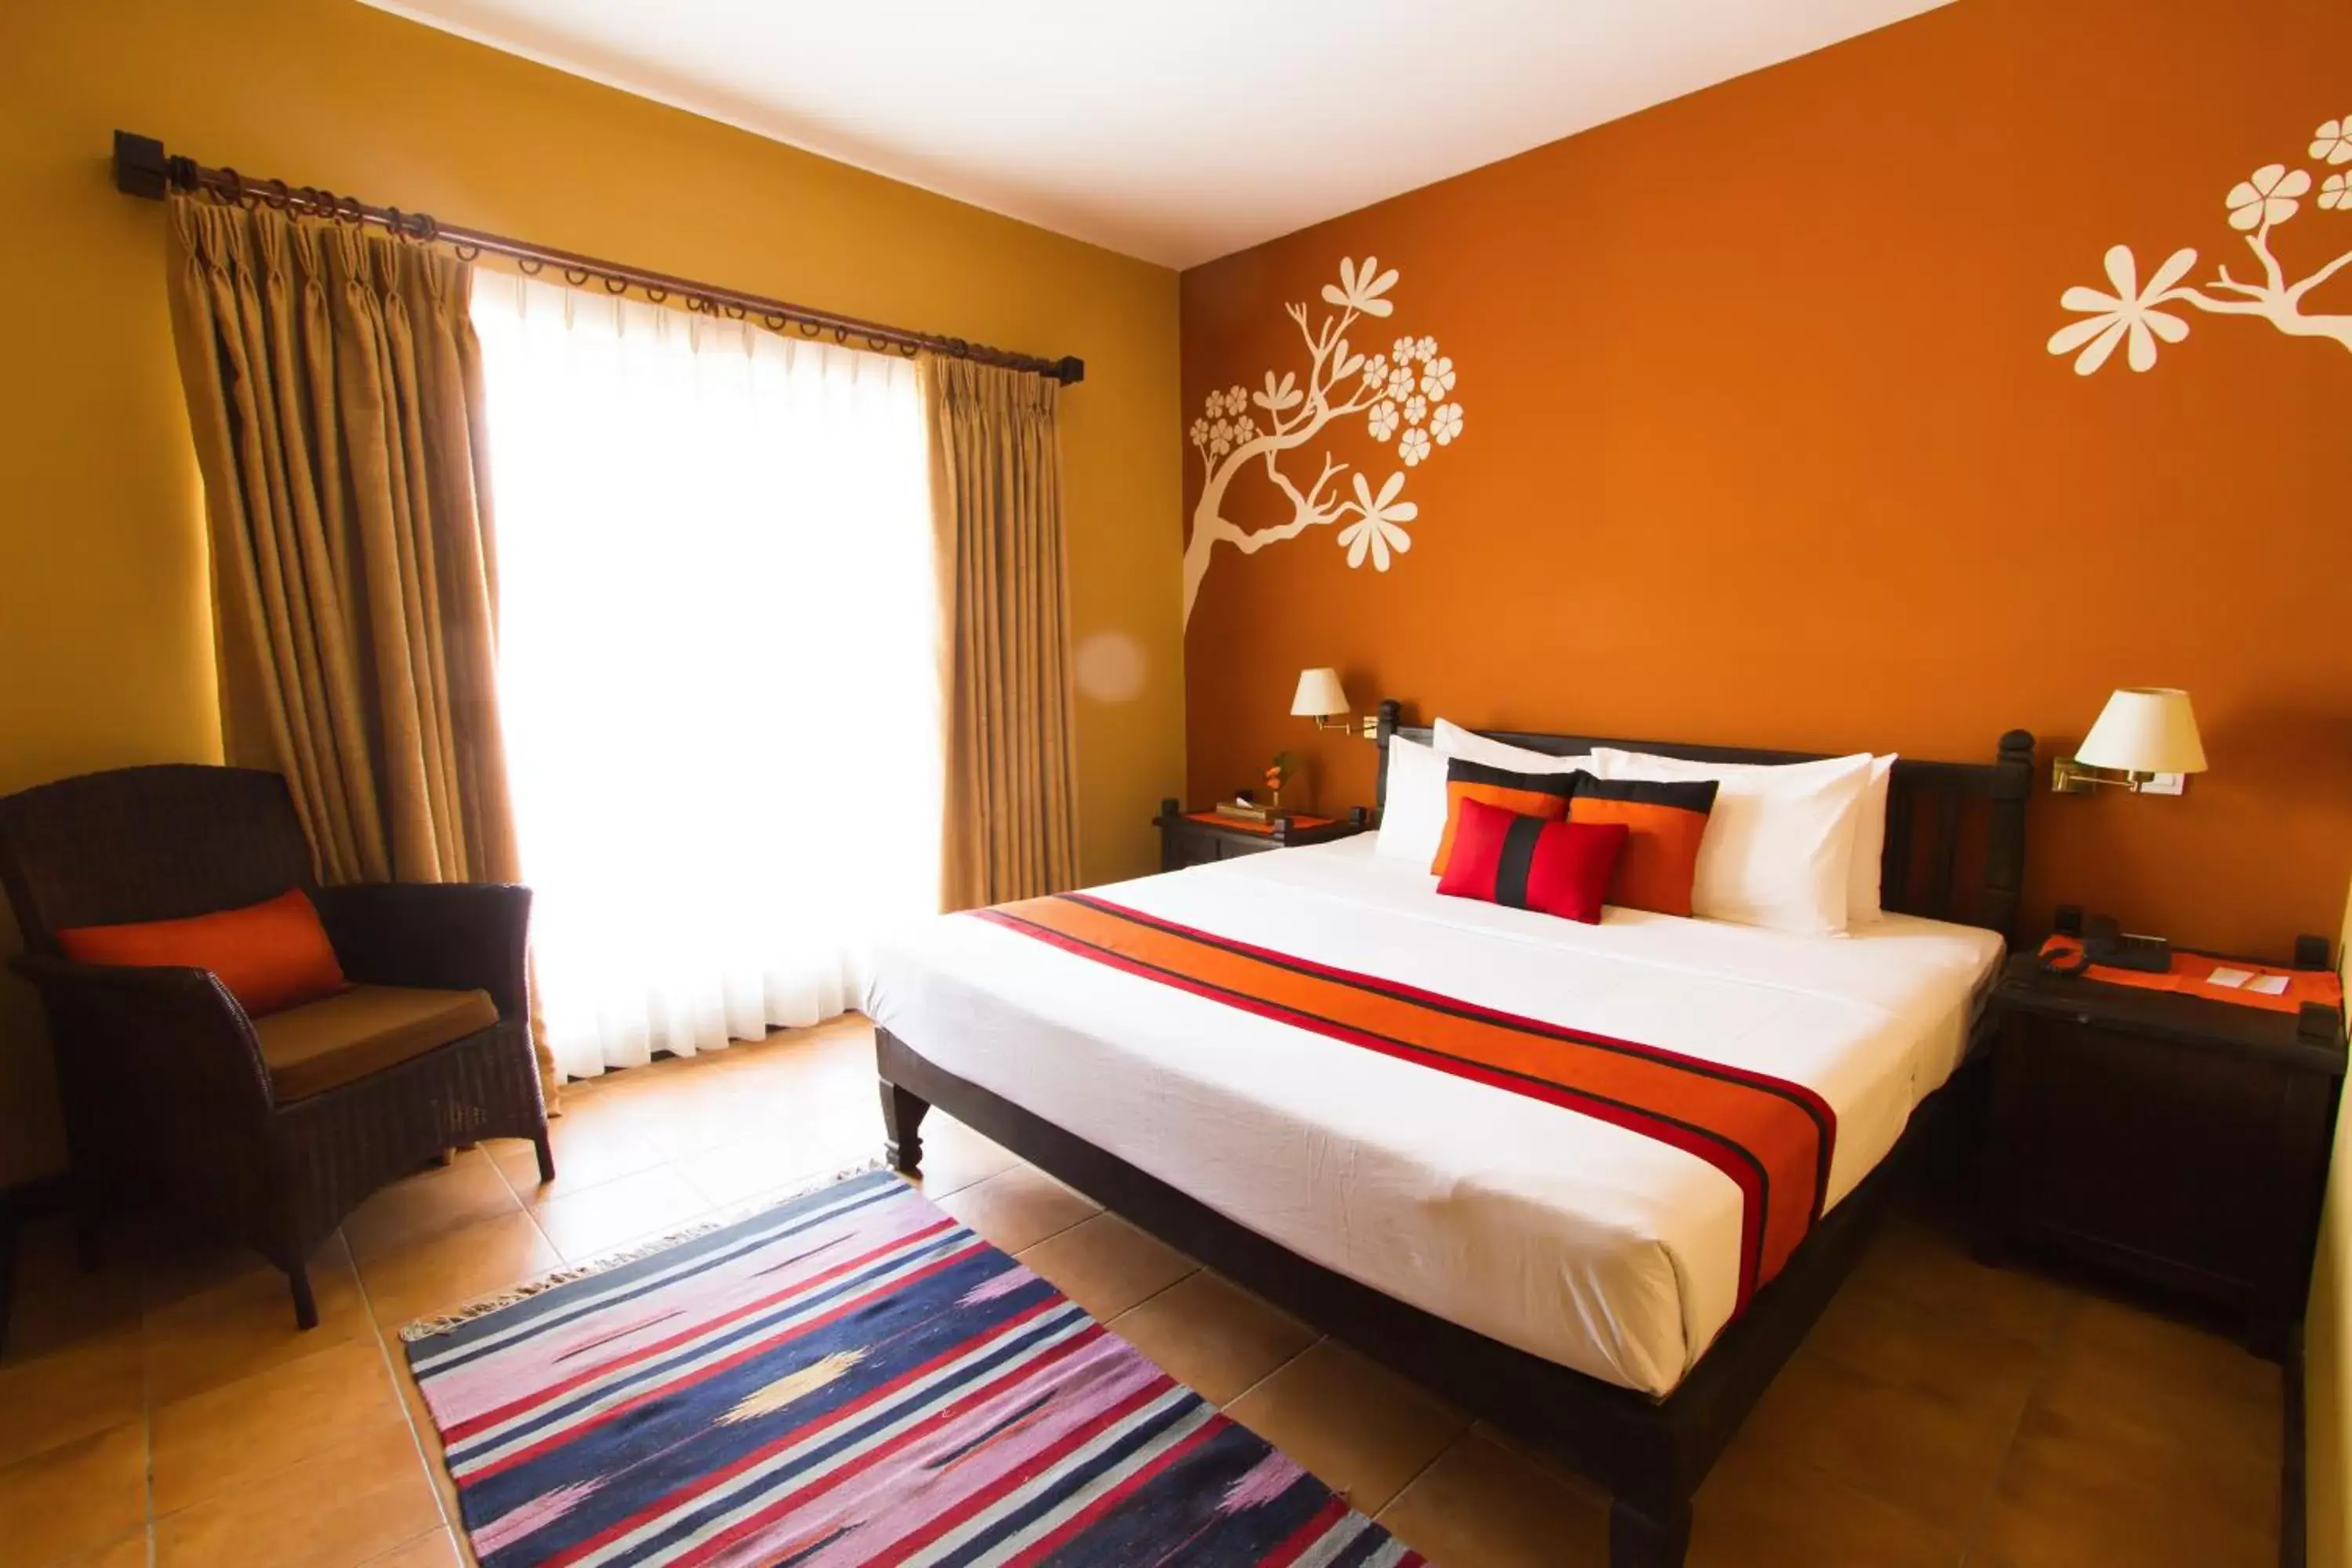 Deluxe Double or Twin Room: Welcome Drink on Arrival, Airport Pick and Drop, Free Upgrade to Super Deluxe Room (as per availability) in Temple Tree Resort & Spa